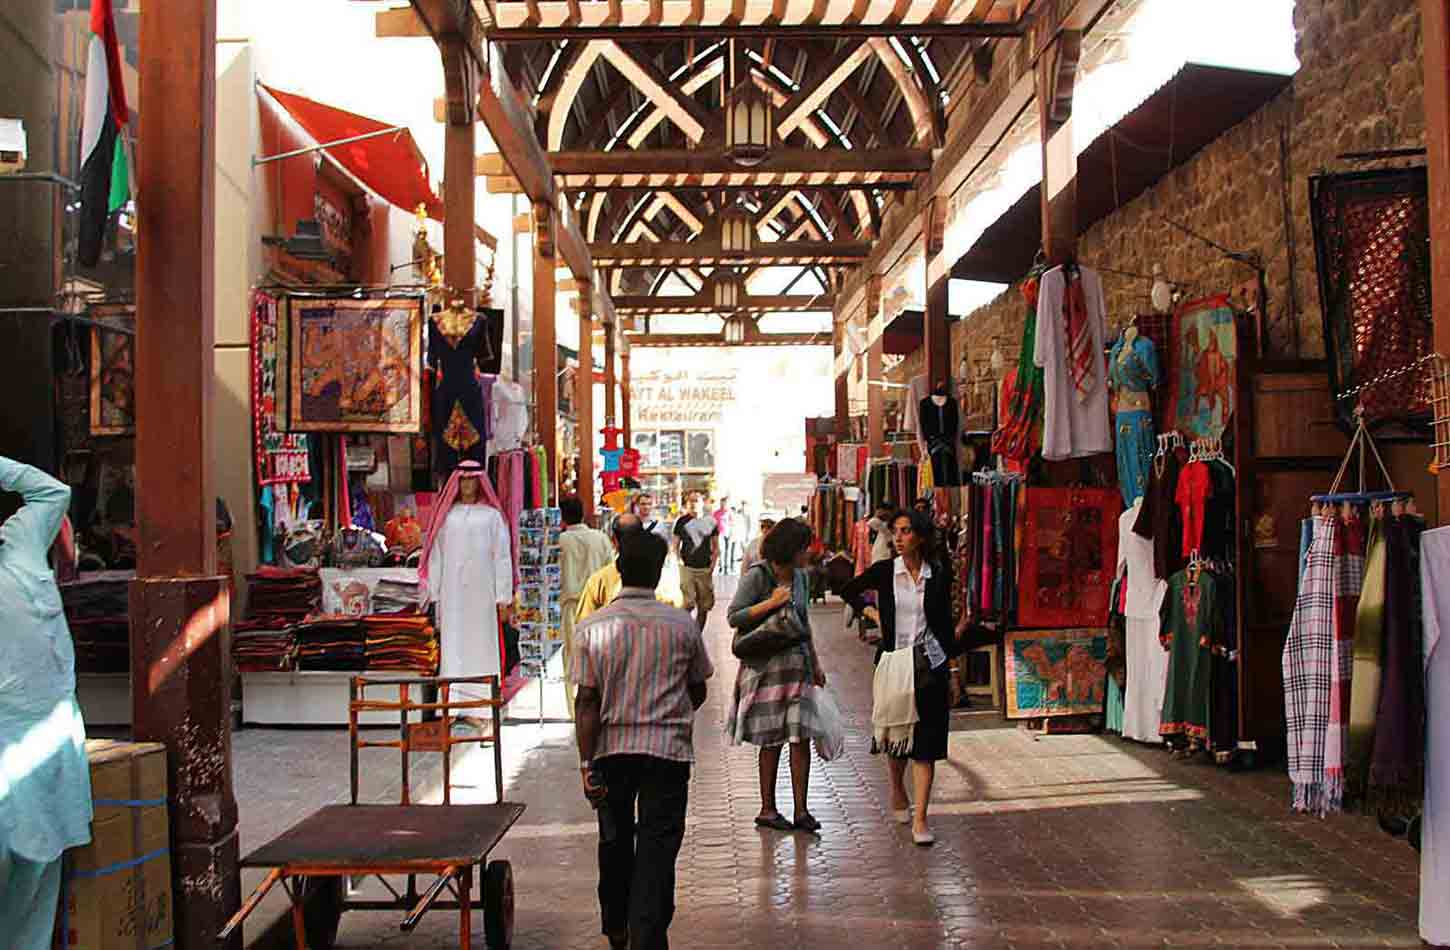 Wonderful Sights Not to Miss in Old Dubai